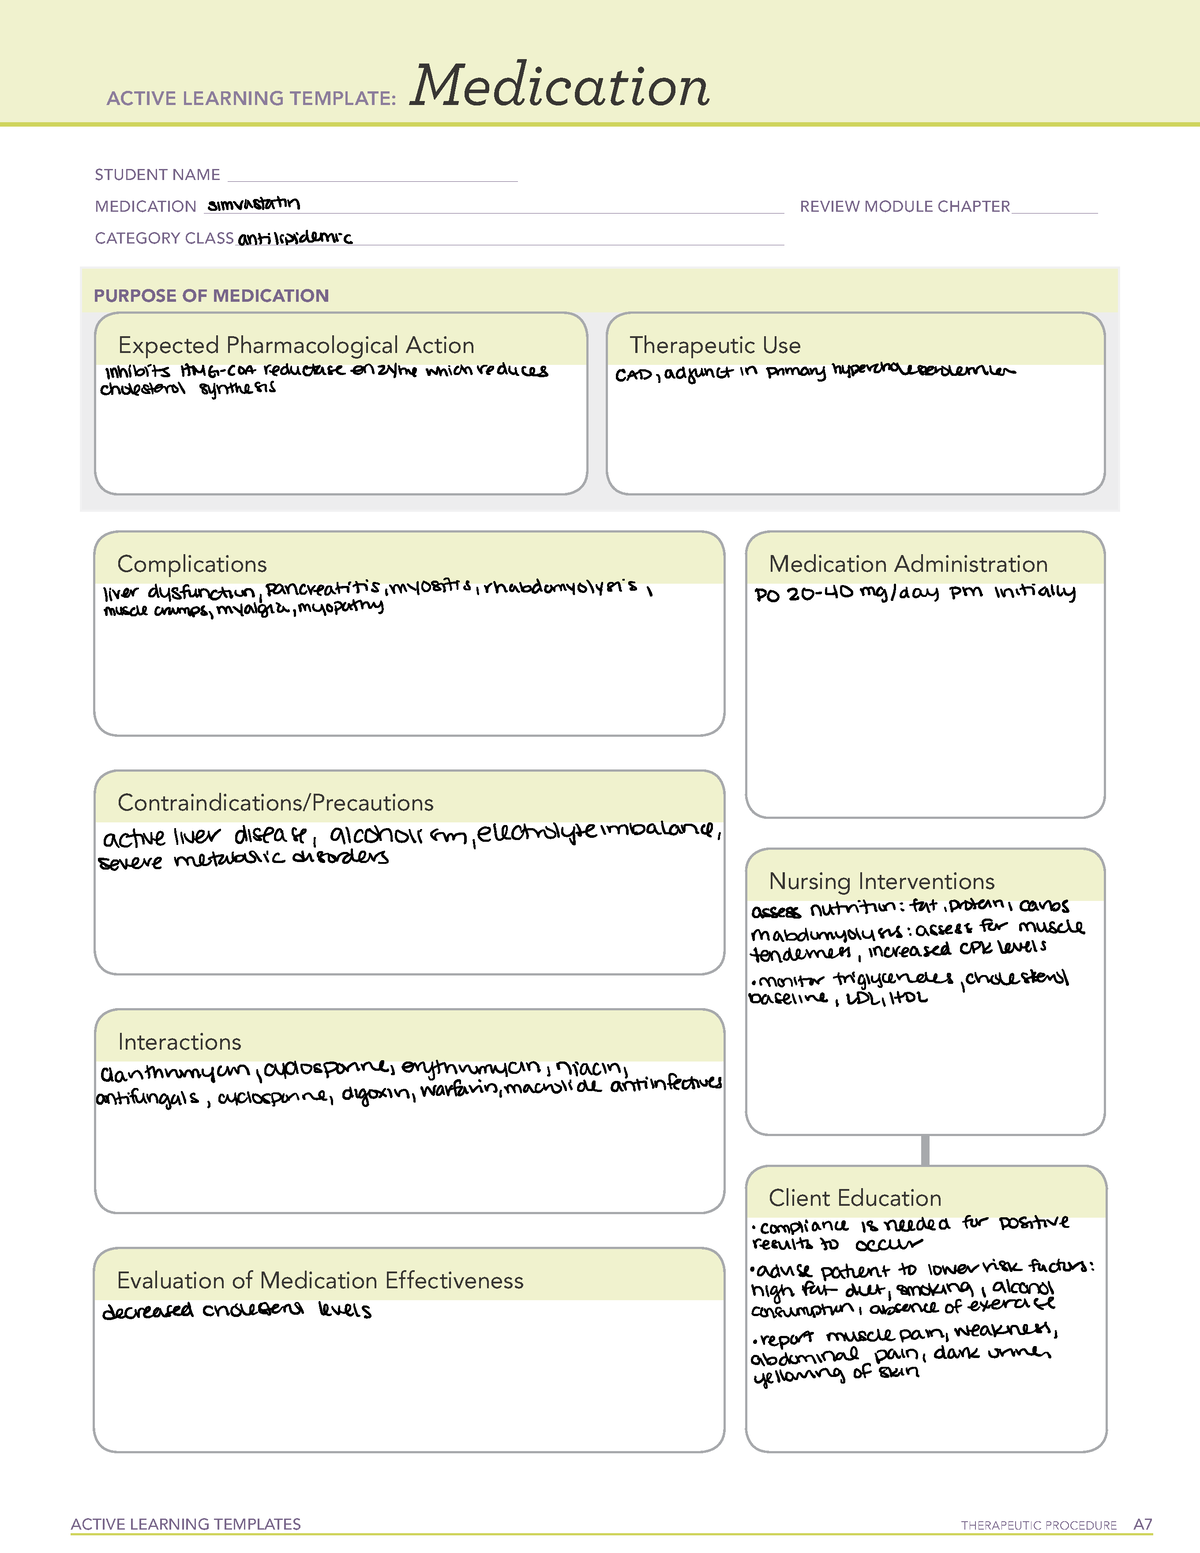 Med template simvastatin ACTIVE LEARNING TEMPLATES THERAPEUTIC